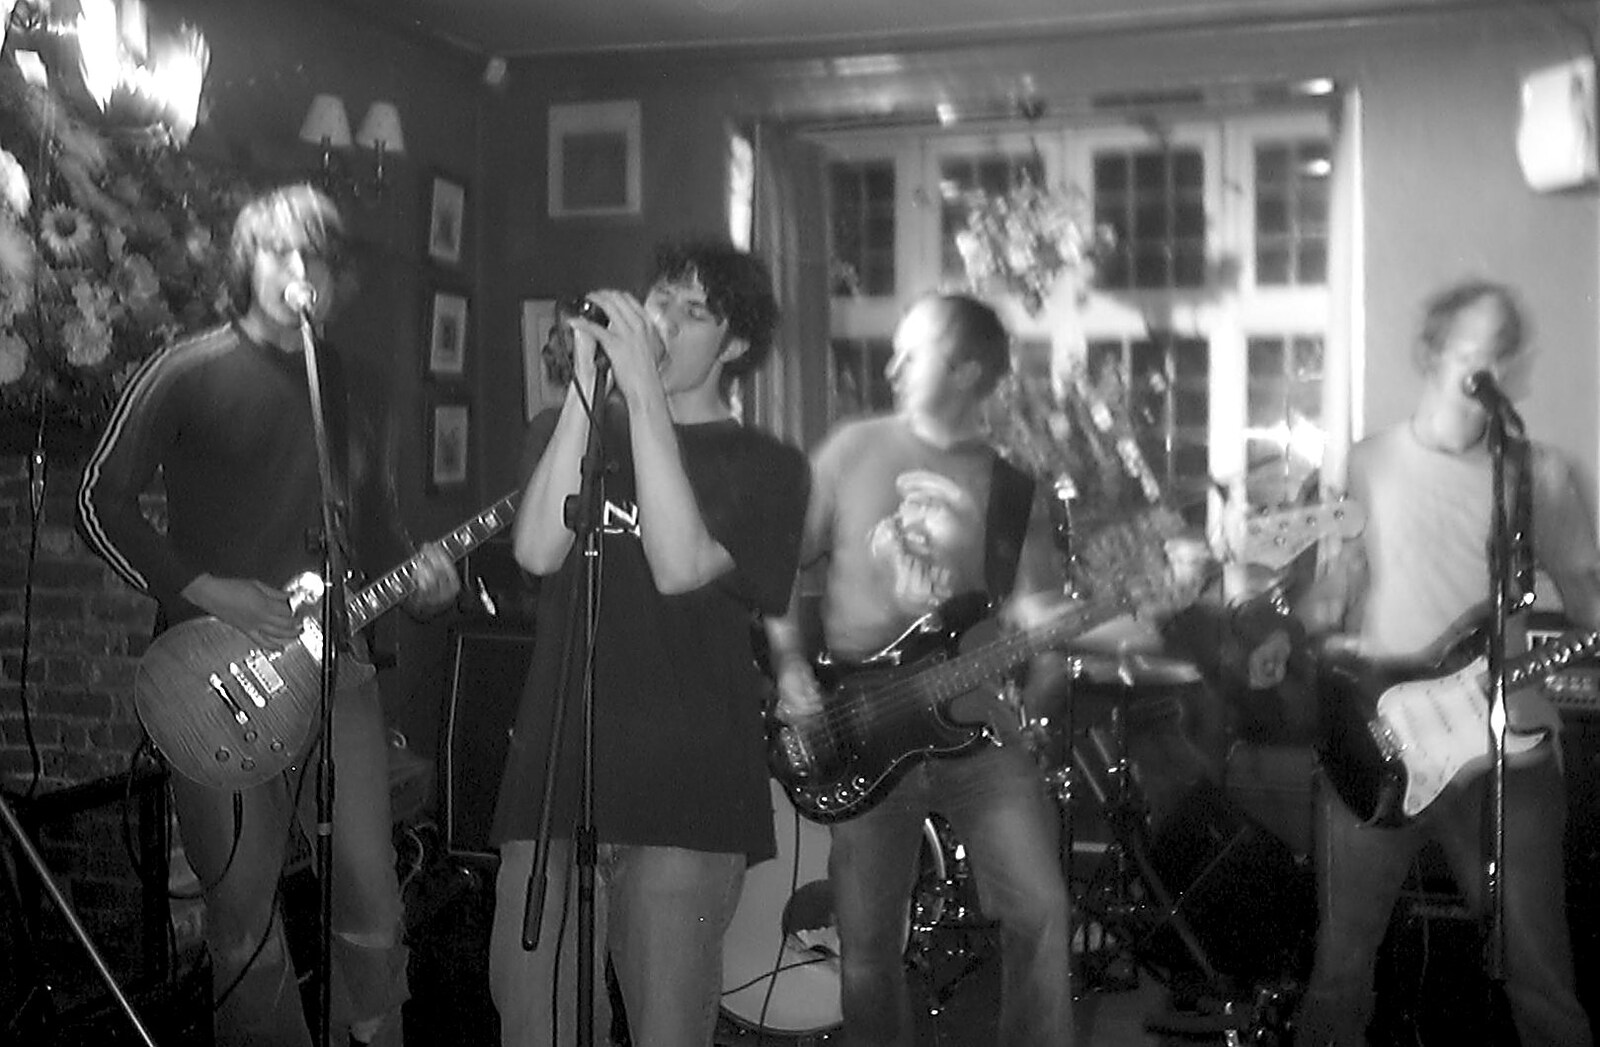 Mark Joseph at Revs, and the BSCC at Hoxne and Wortham - 30th September 2004: The band does its thing